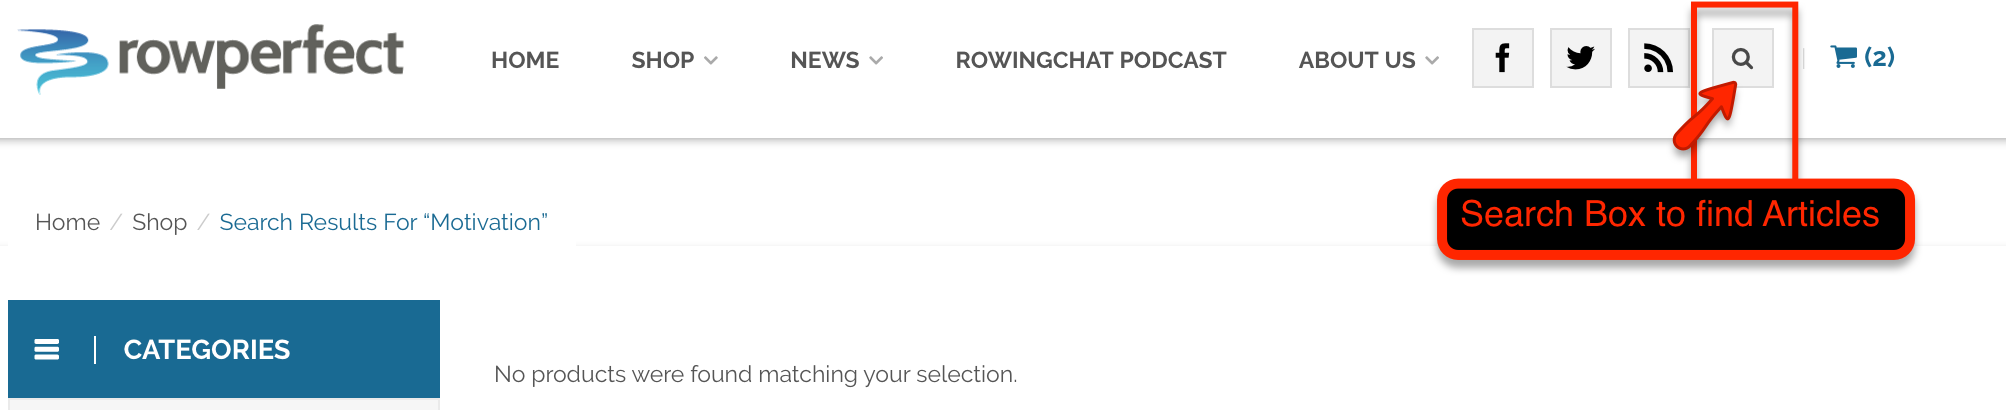 search, in site search, rowperfect, rowing advice, rowing education